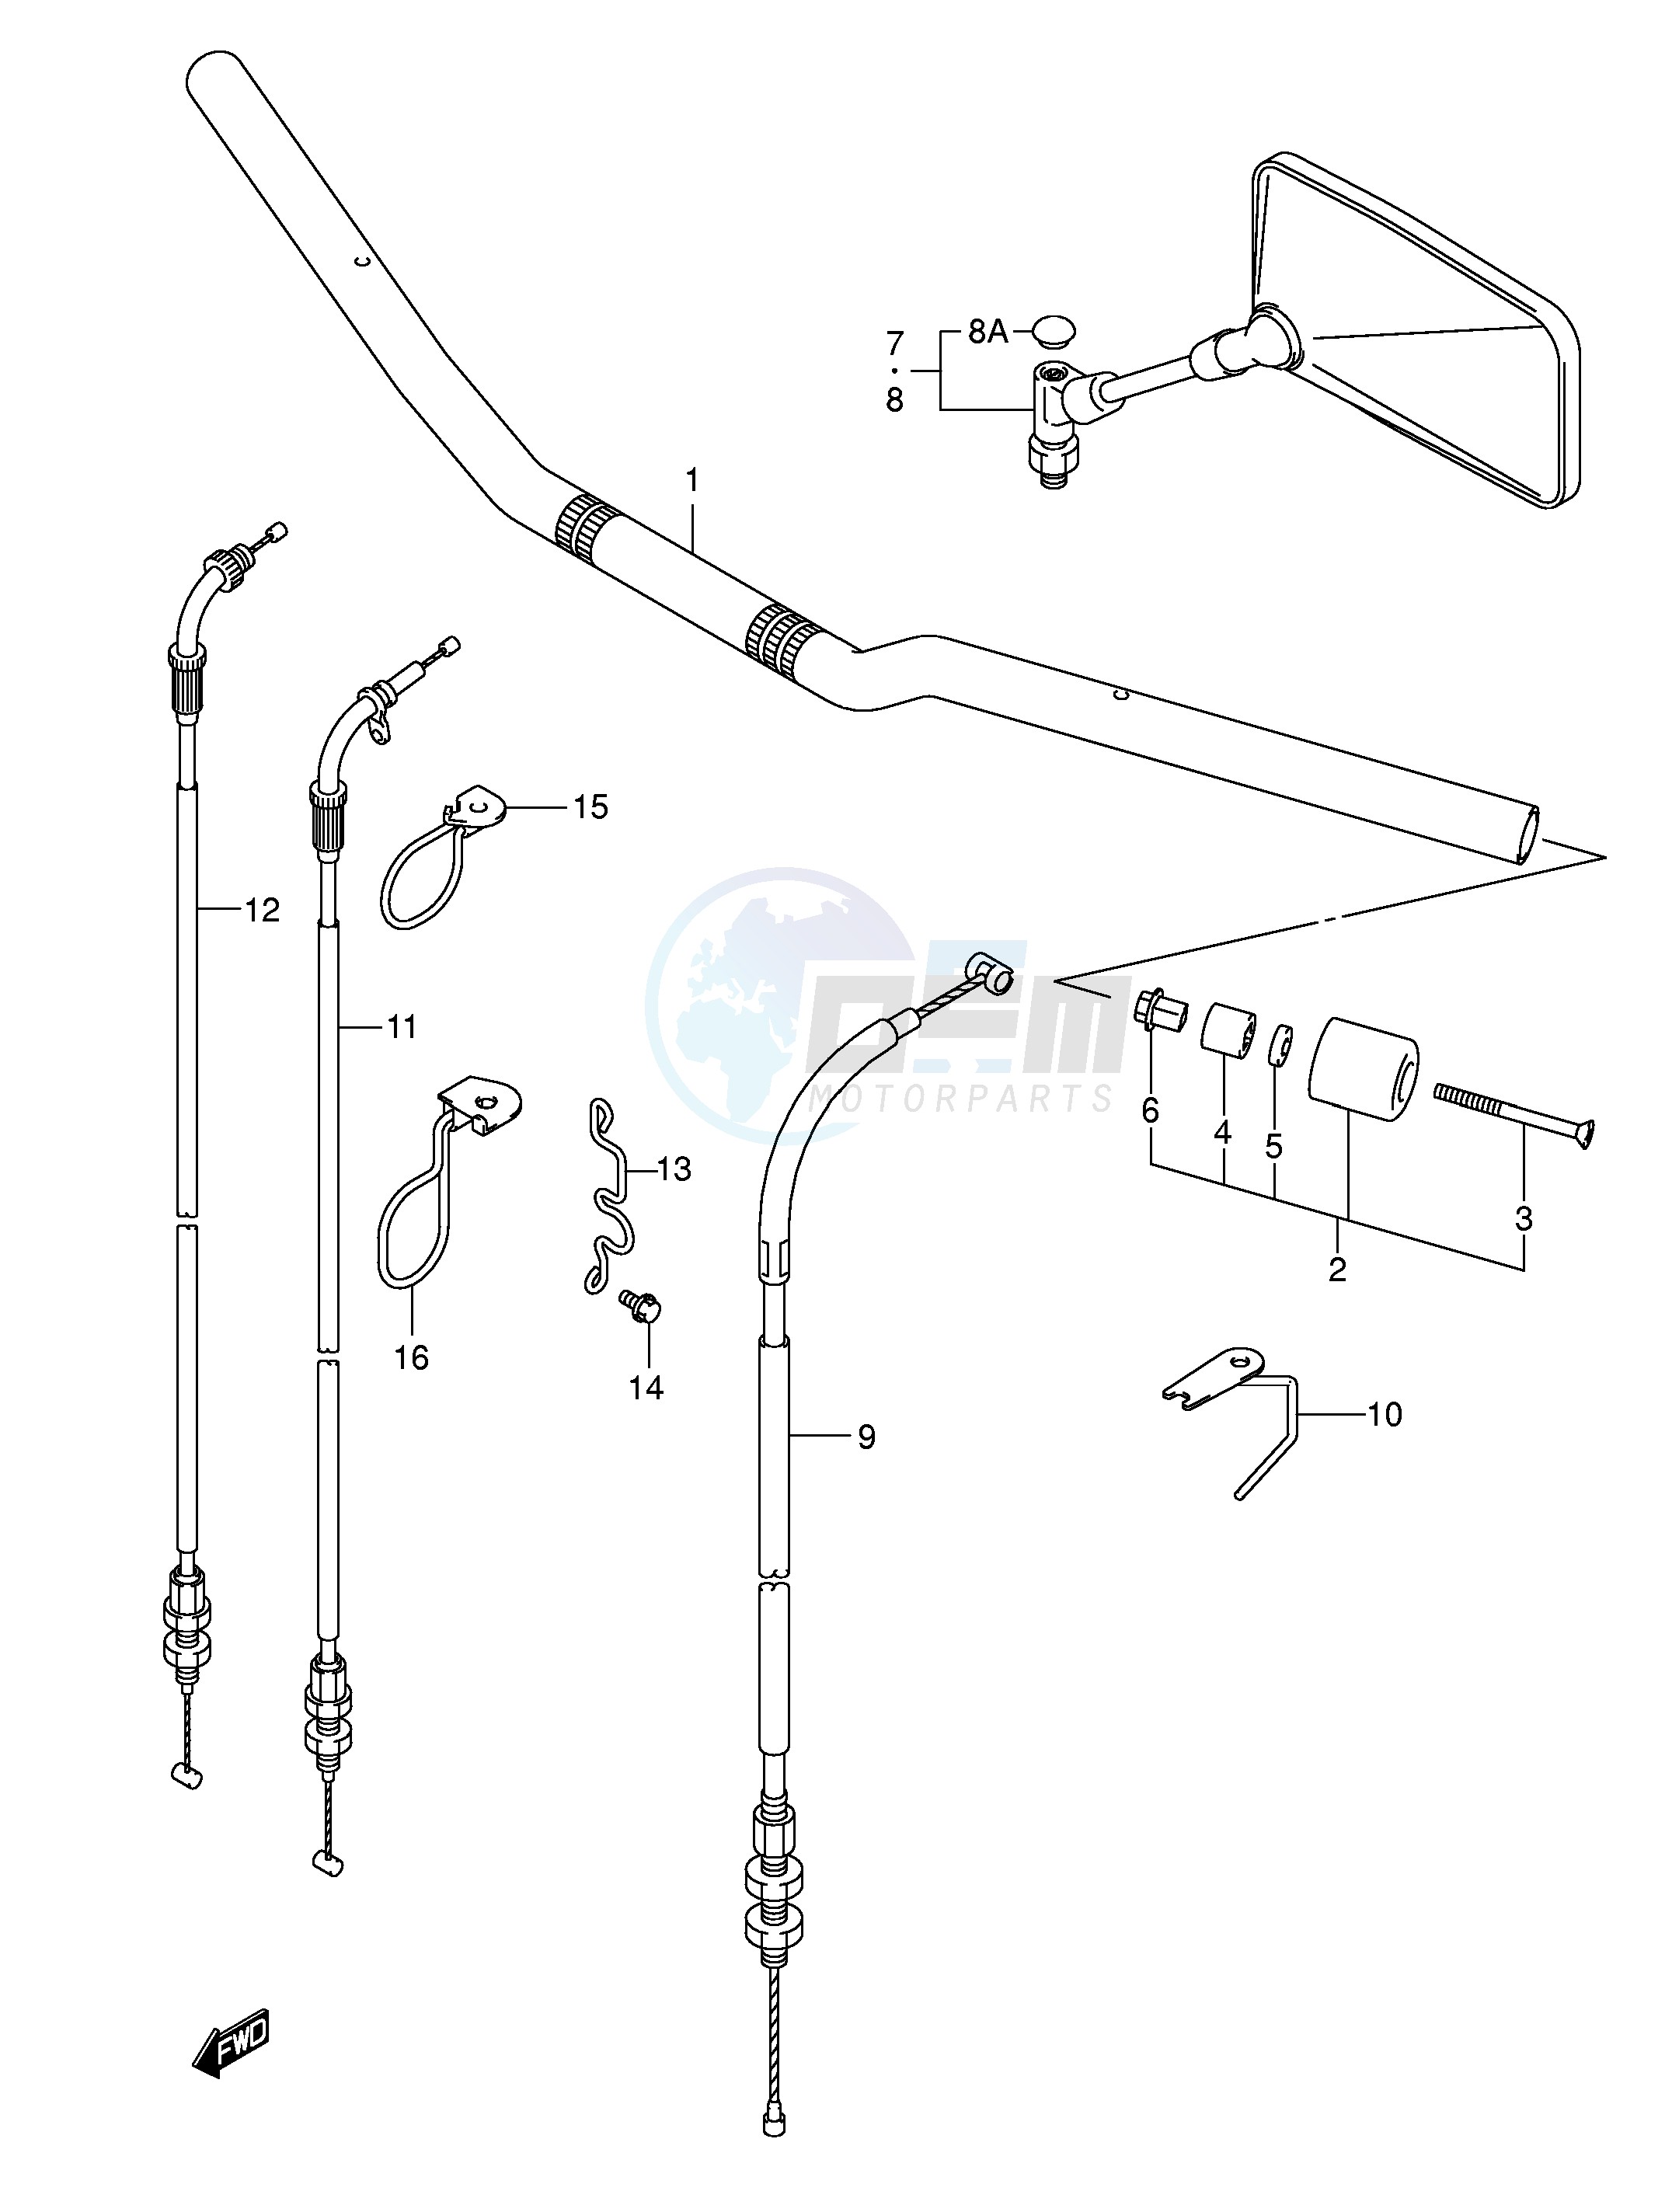 HANDLEBAR (WITH OUT COWLING) blueprint